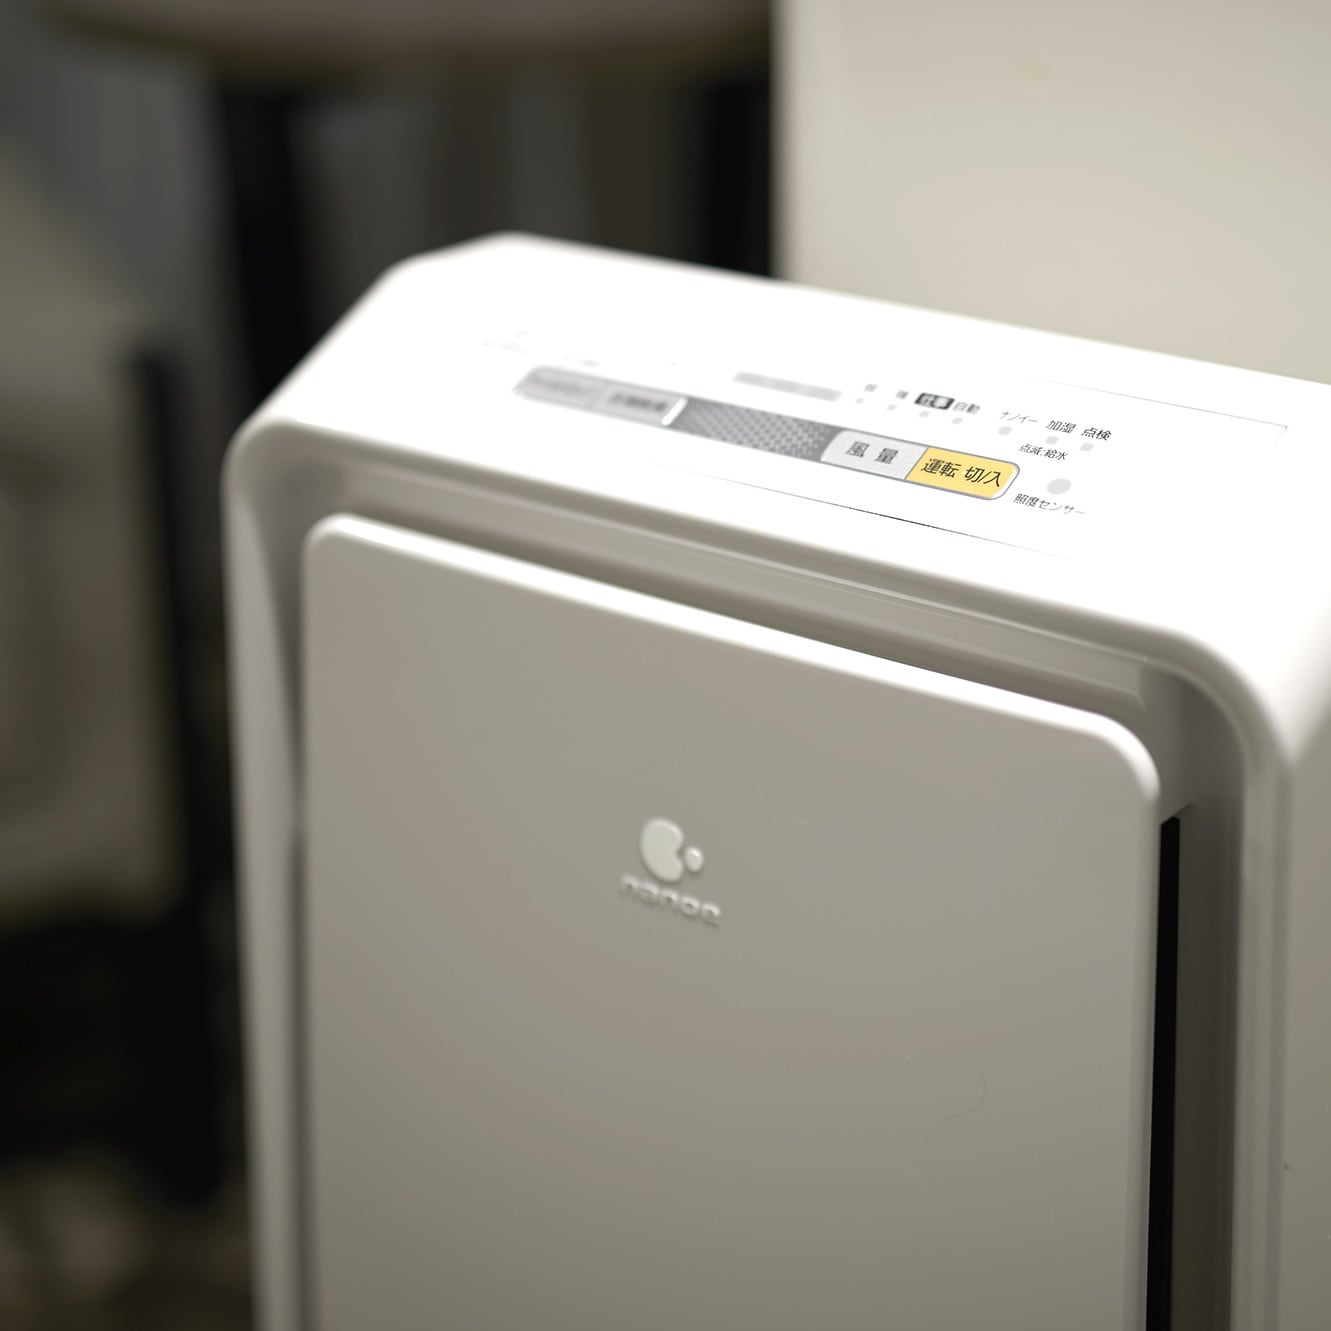 All rooms are equipped with an air purifier with a humidifying function